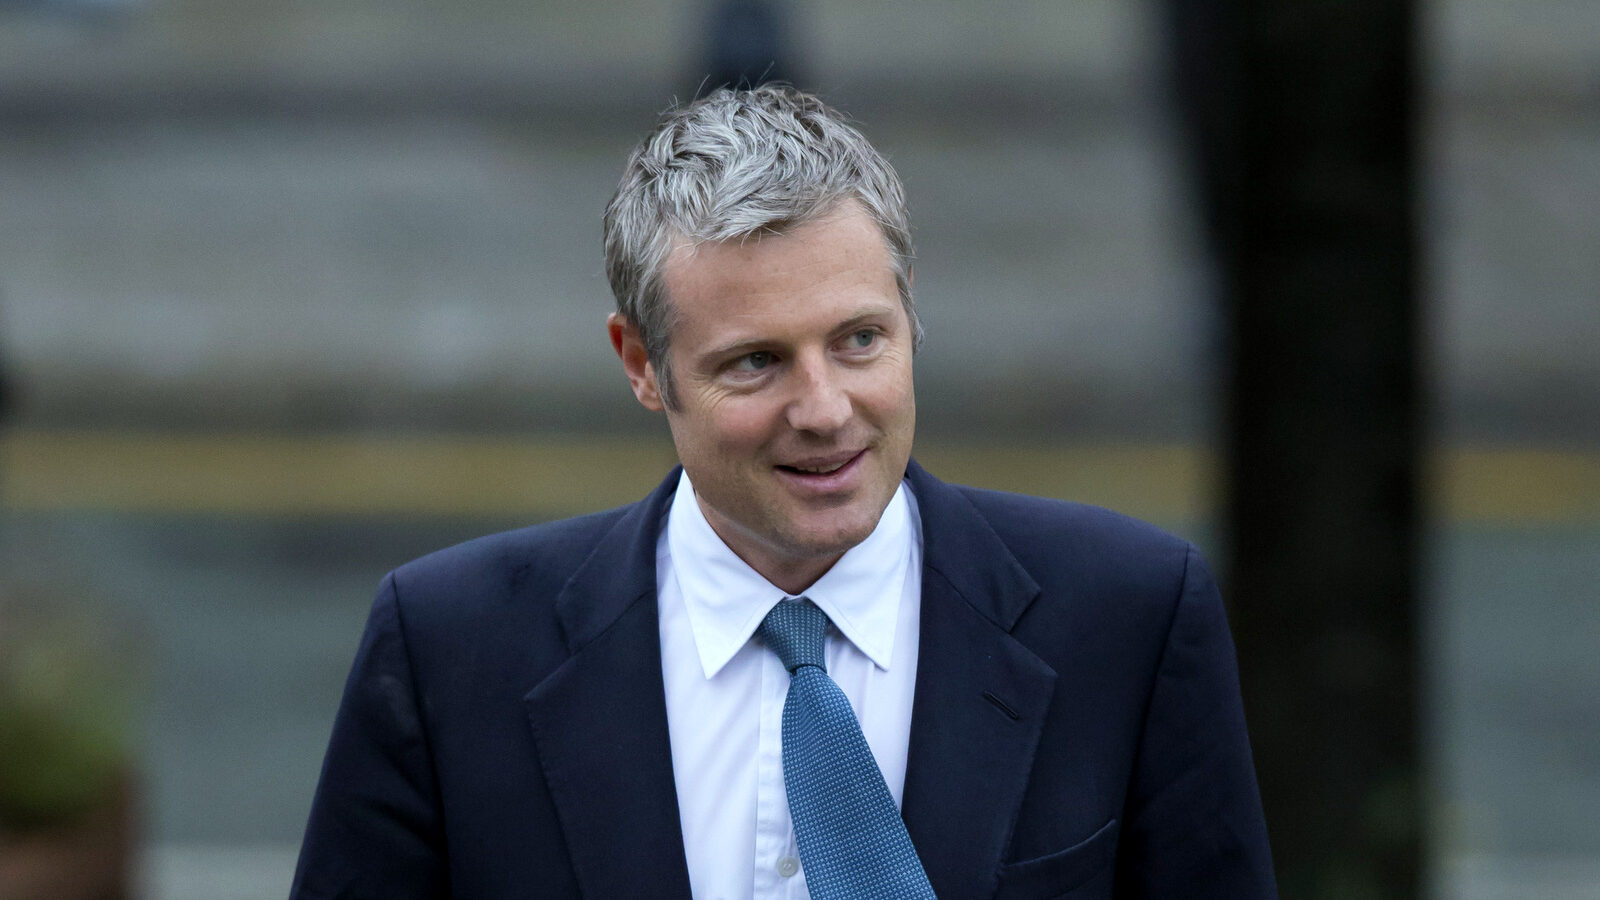 Zac Goldsmith makes his way to see Britain's Prime Minister David Cameron make his keynote speech at the annual Conservative Party Conference in Manchester, England, Wednesday Oct. 7, 2015. (AP Photo/Jon Super)